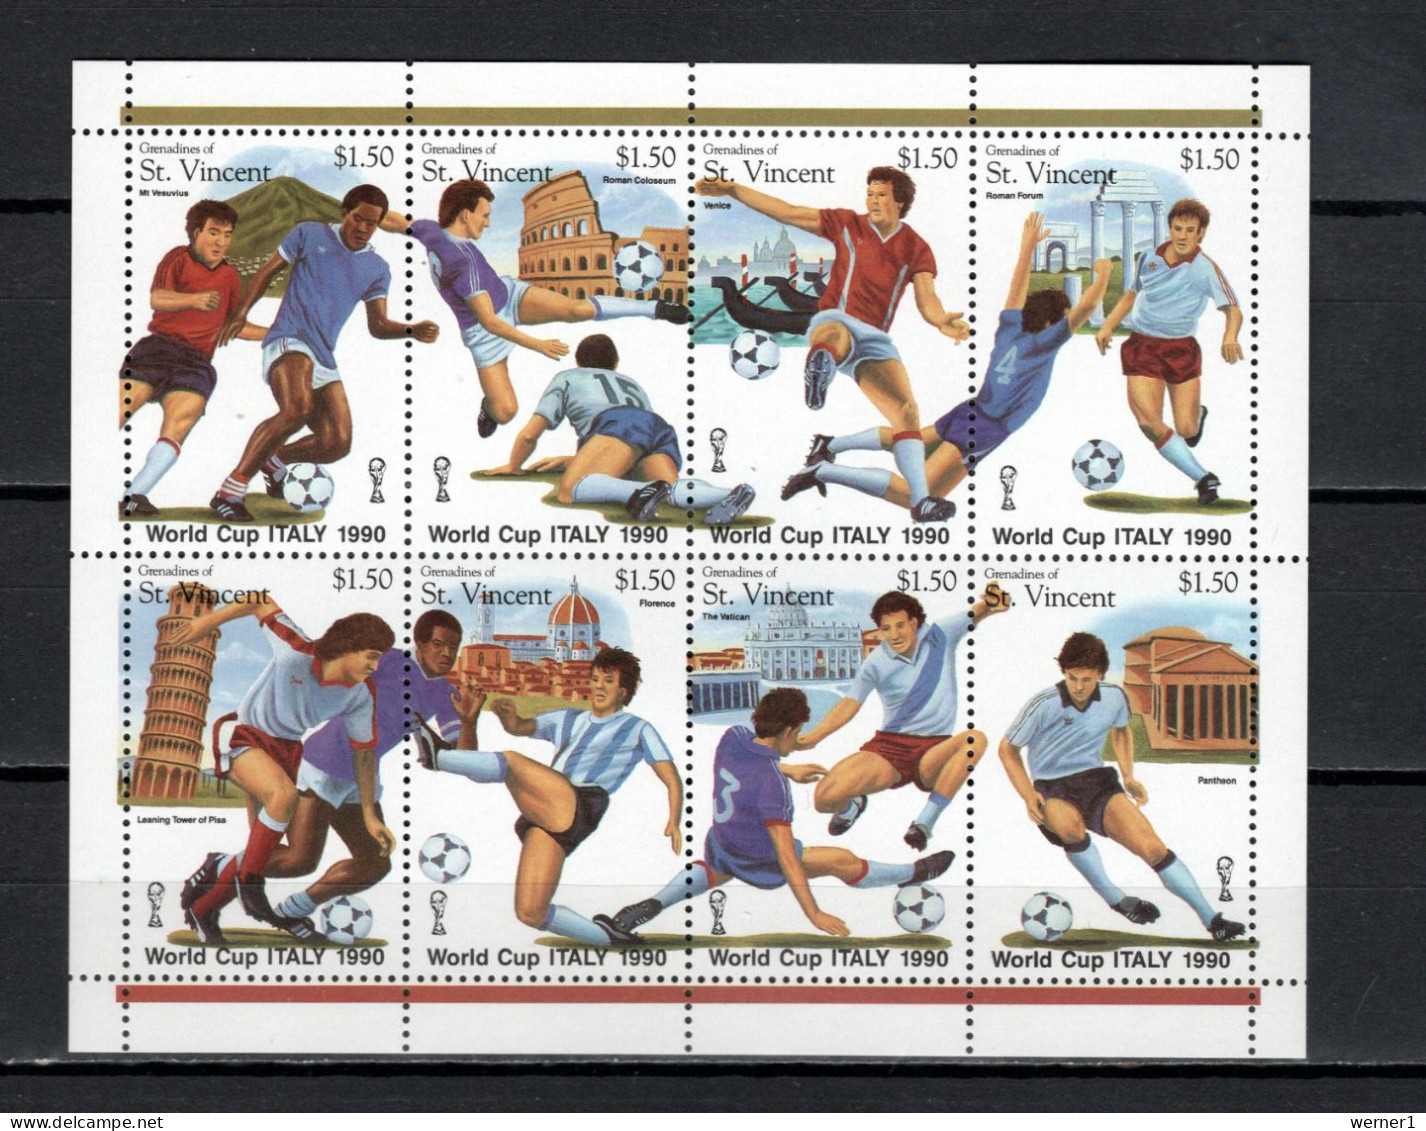 St. Vincent - Grenadines 1989 Football Soccer World Cup Sheetlet MNH - 1990 – Italy